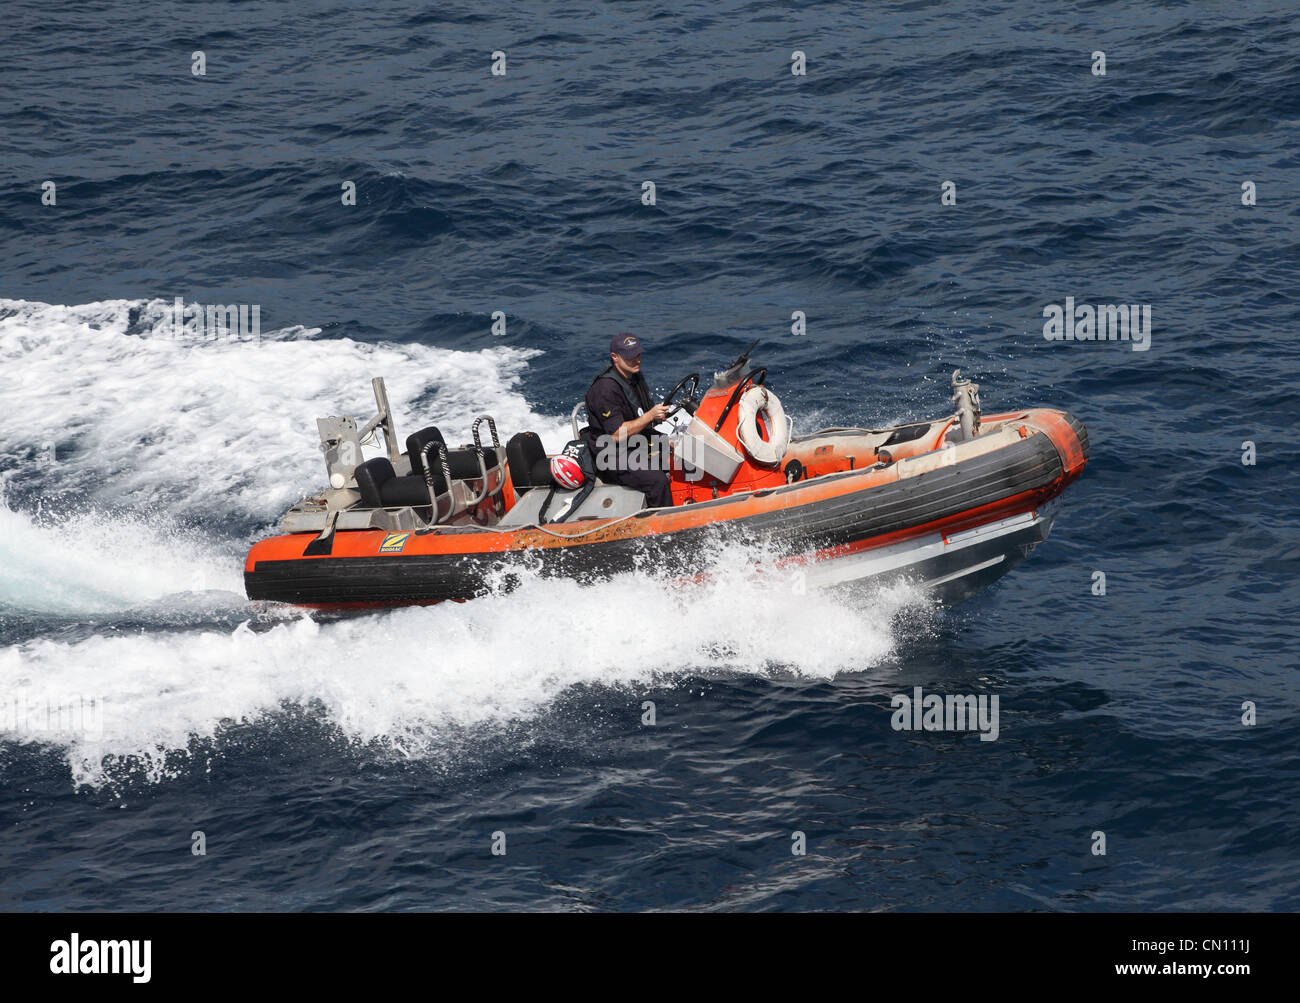 A Maltese coastguard steers a Zodiac inflatable at speed between the Mediterranean islands of Malta and Gozo Europe Stock Photo